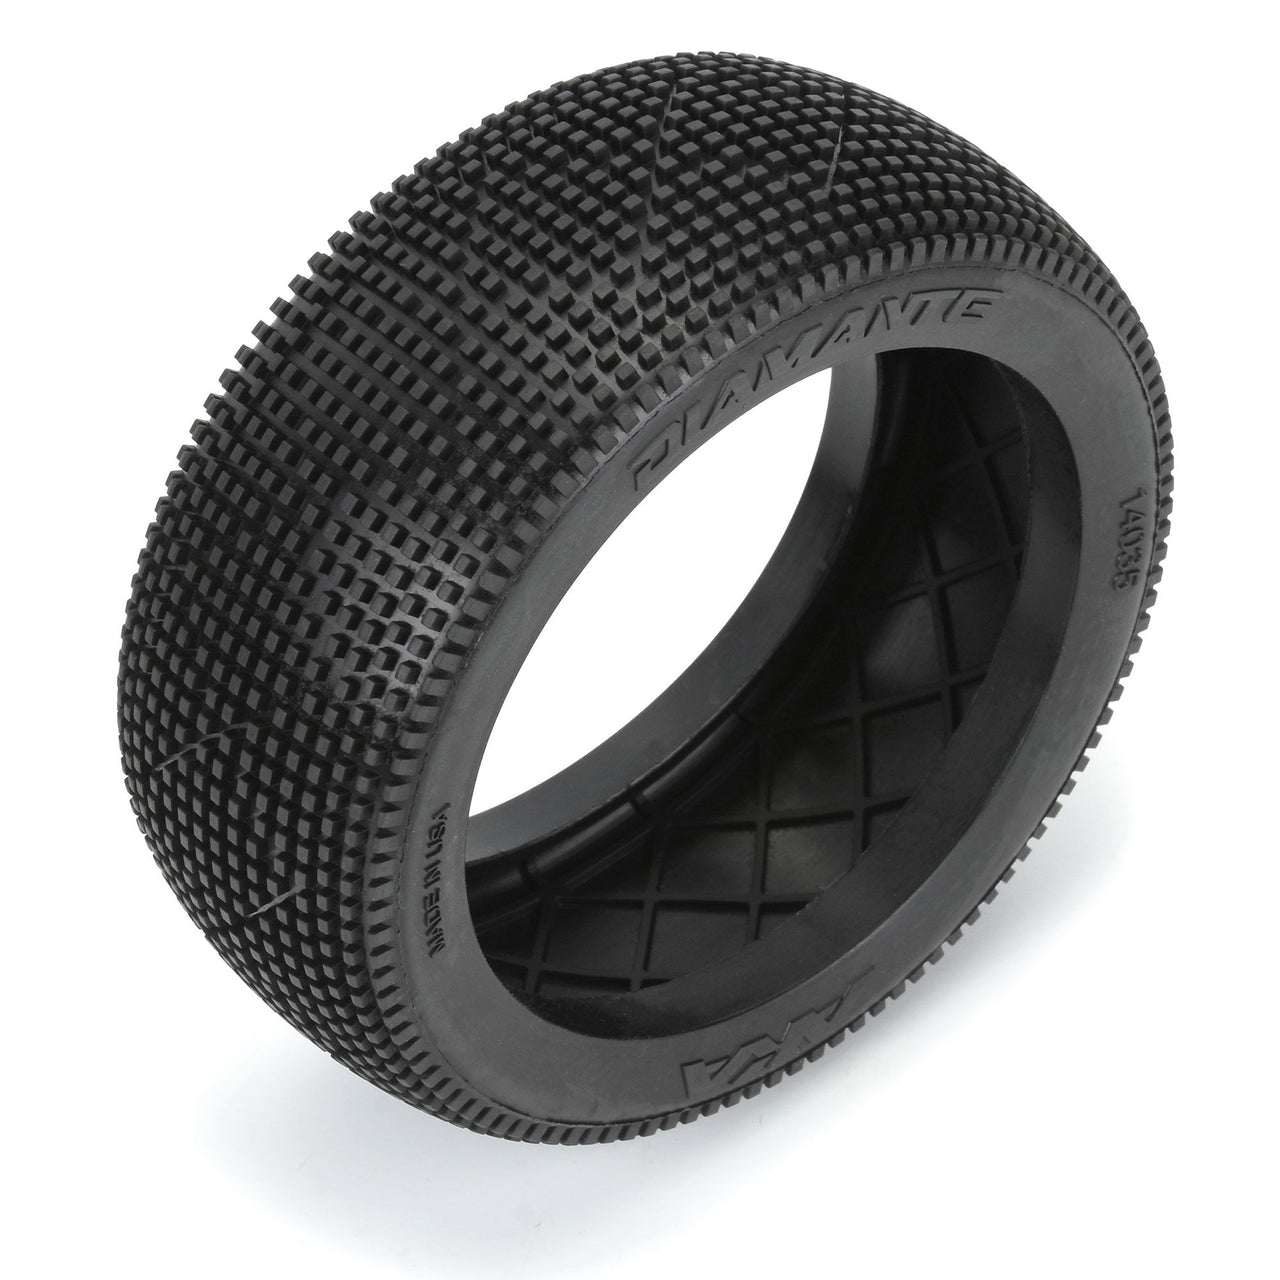 AKA14035CR 1/8 Diamante Clay Front/Rear Off-Road Buggy Tires (2)